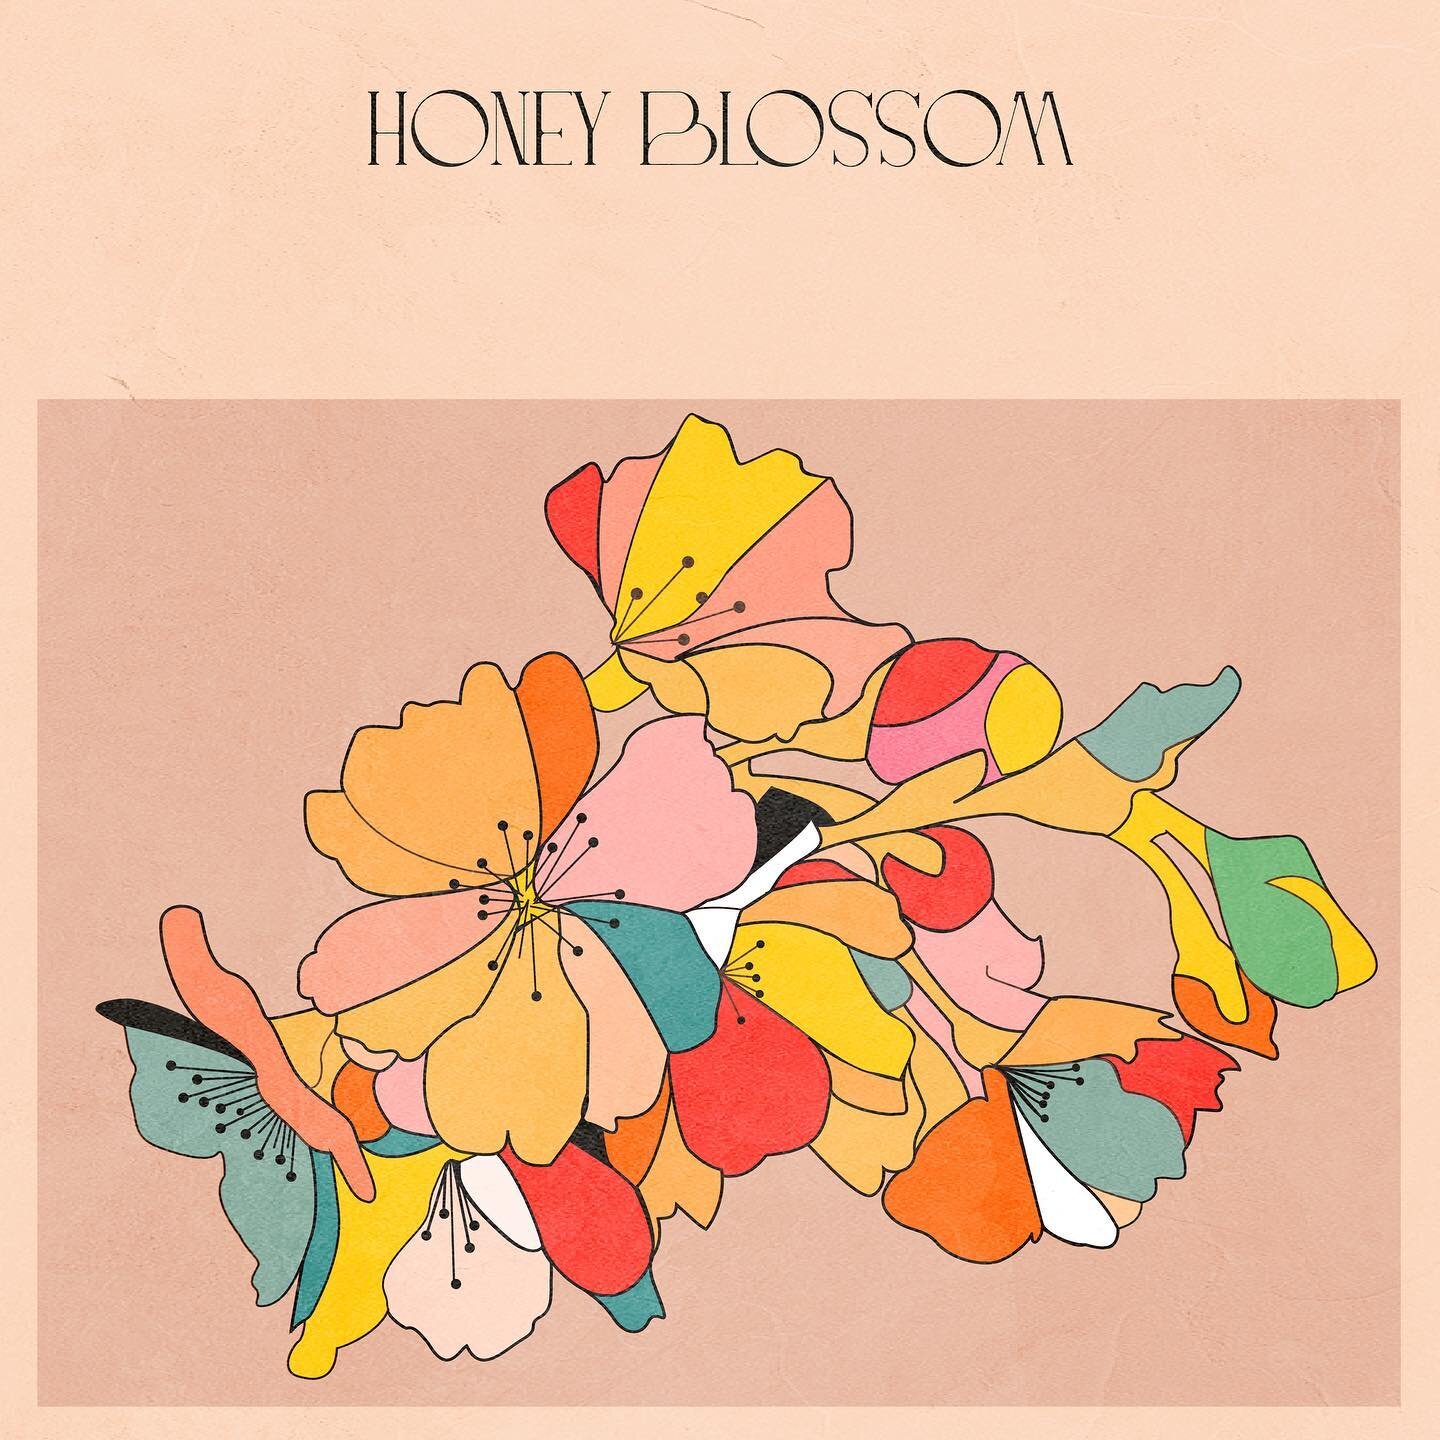 Honey Blossom is here! We&rsquo;re really happy to share this one with you guys. It&rsquo;s a bit of a different feeling than some of our other music but we really LOVE how it turned out. The world needs more positive music like this, wouldn&rsquo;t 